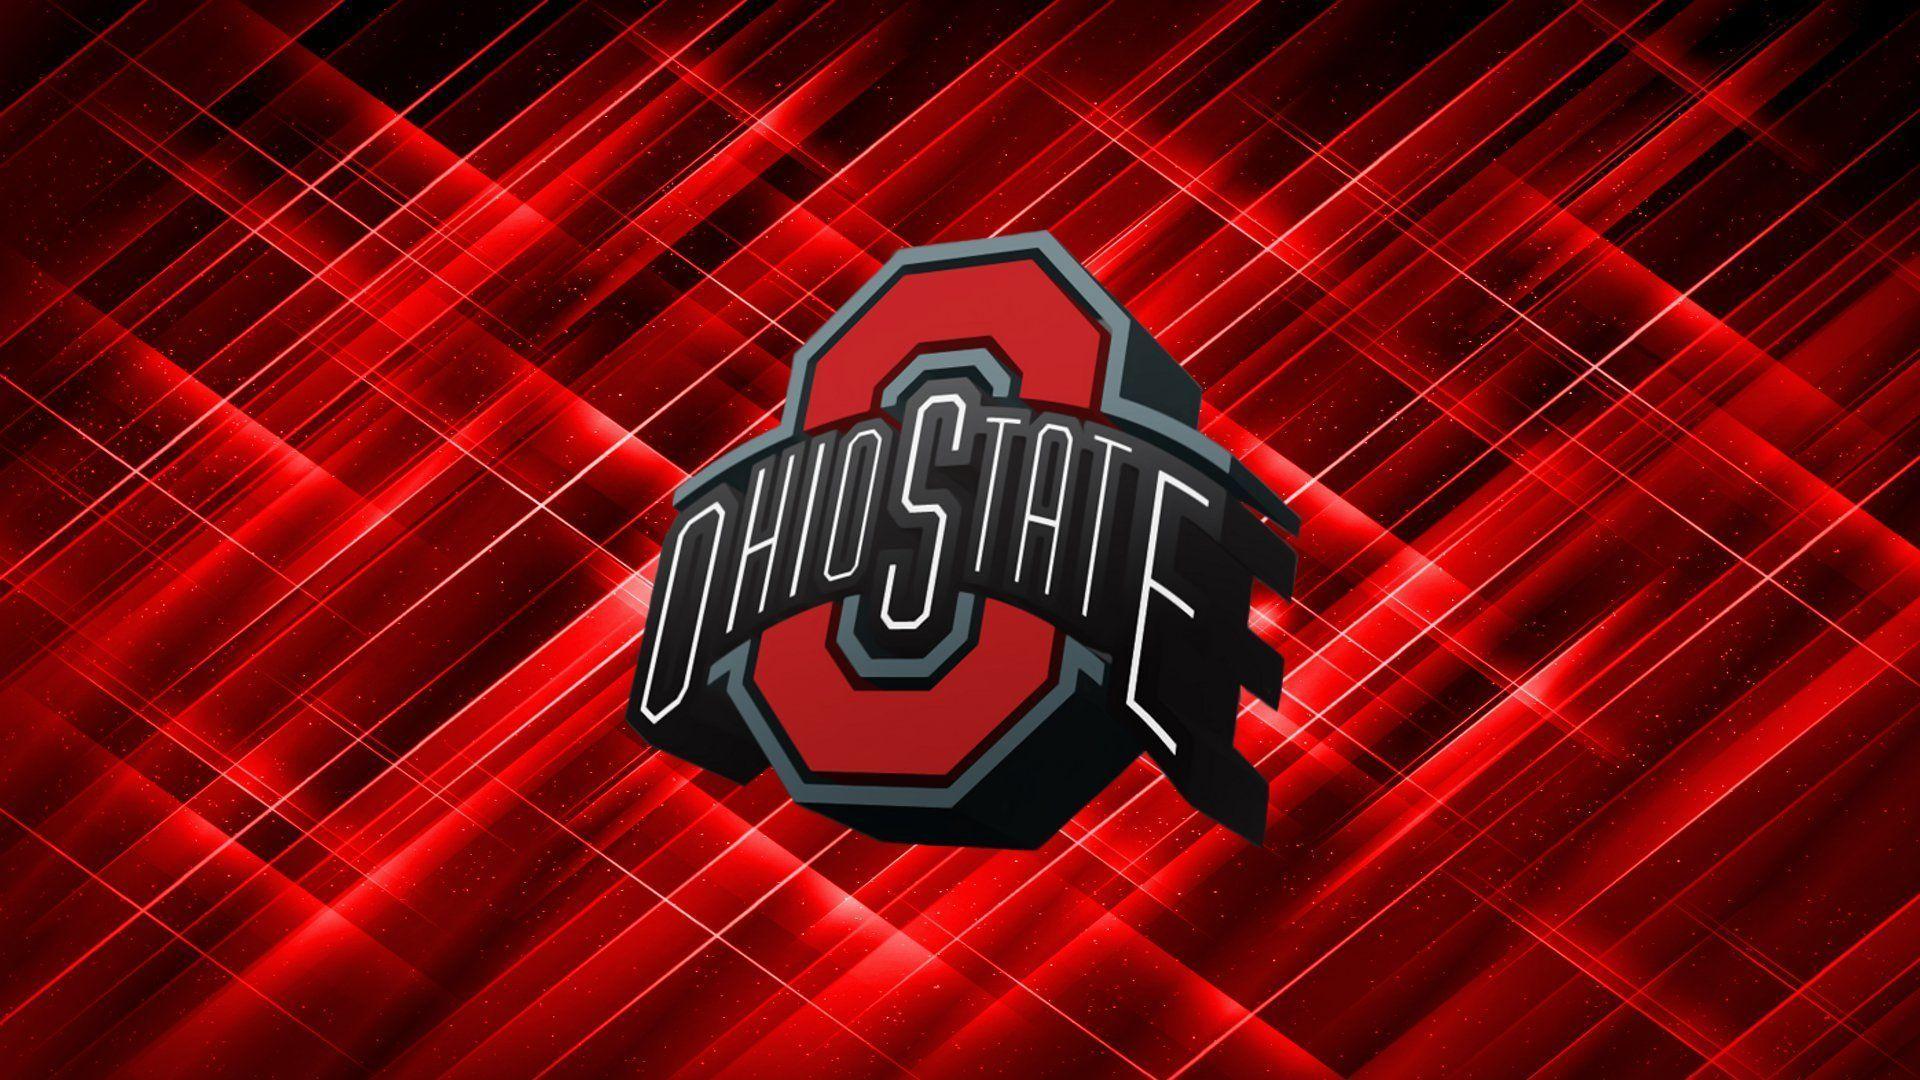 Ohio State Buckeyes Football Background Download. HD Wallpaper